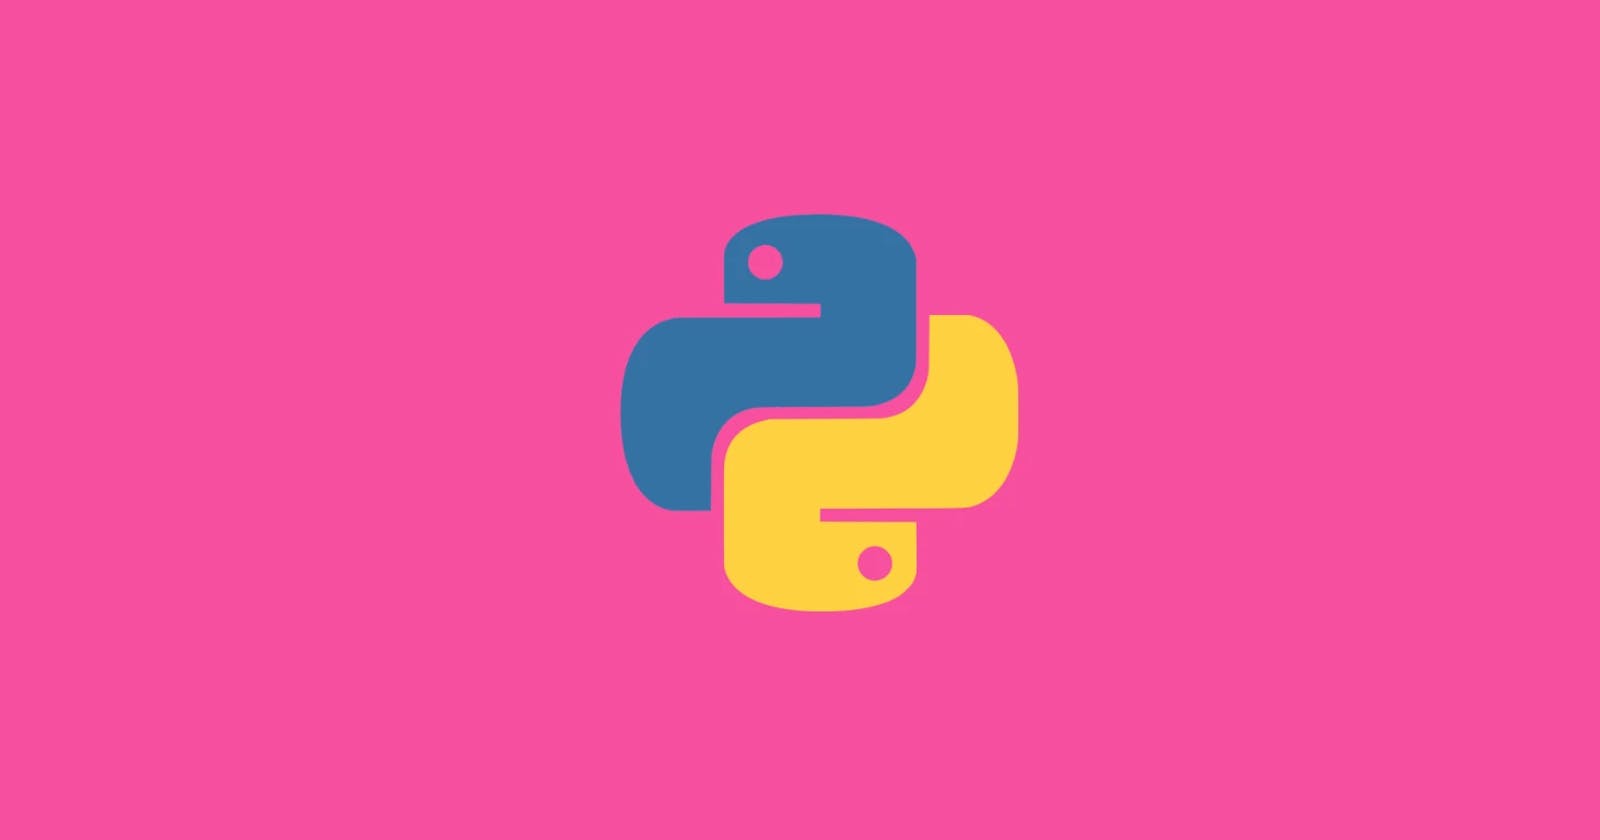 How to get an absolute path in Python